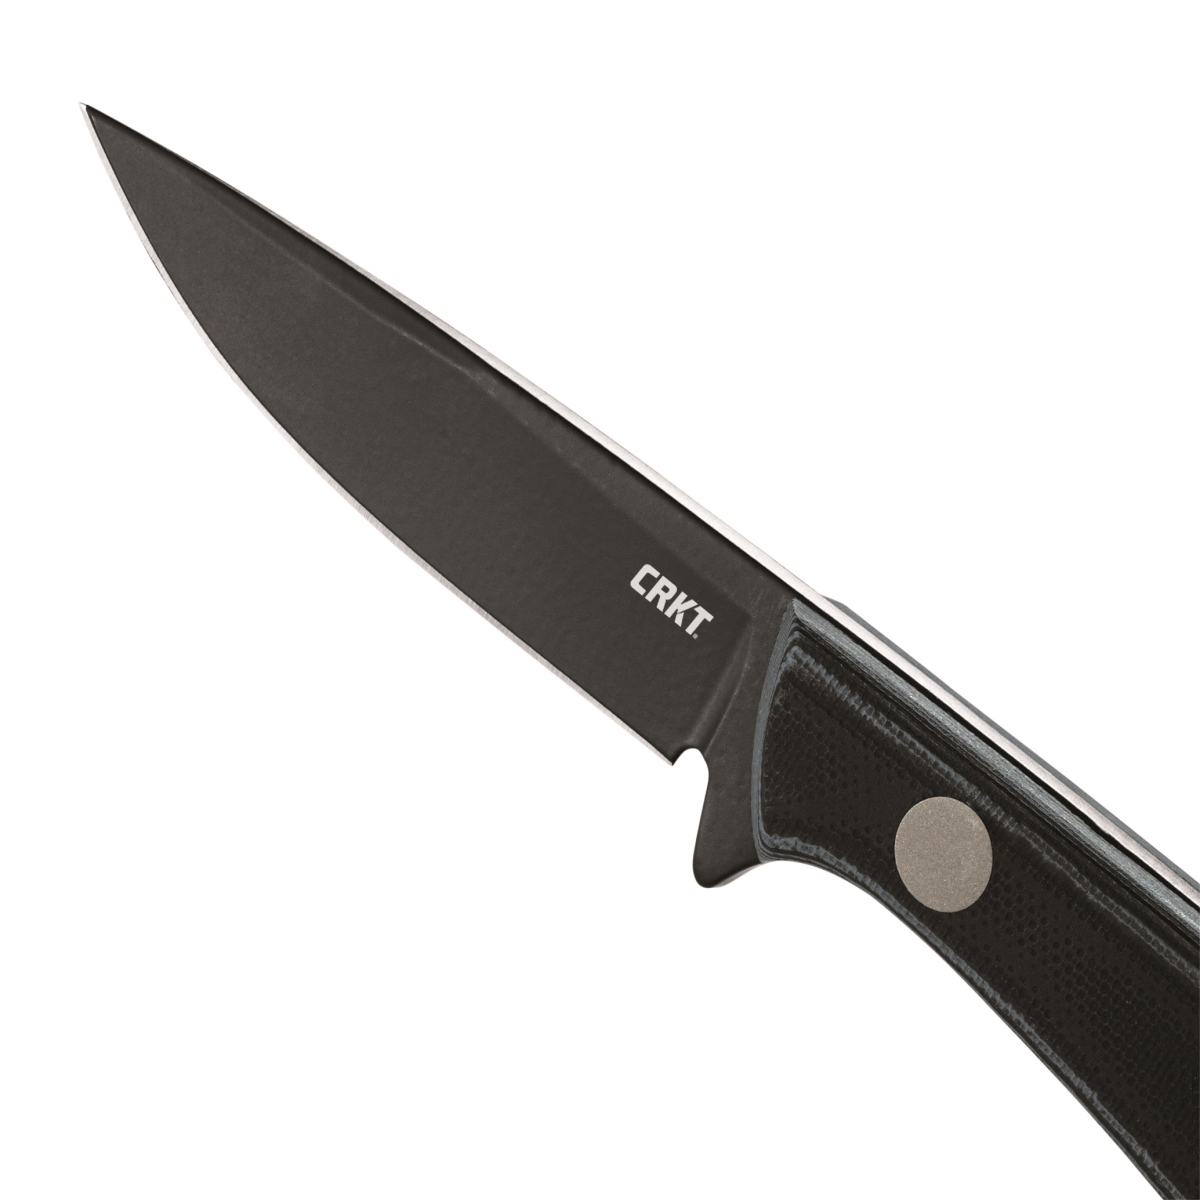 Crk-2832 2019 Mossback Bird & Trout Fixed Knife Blade